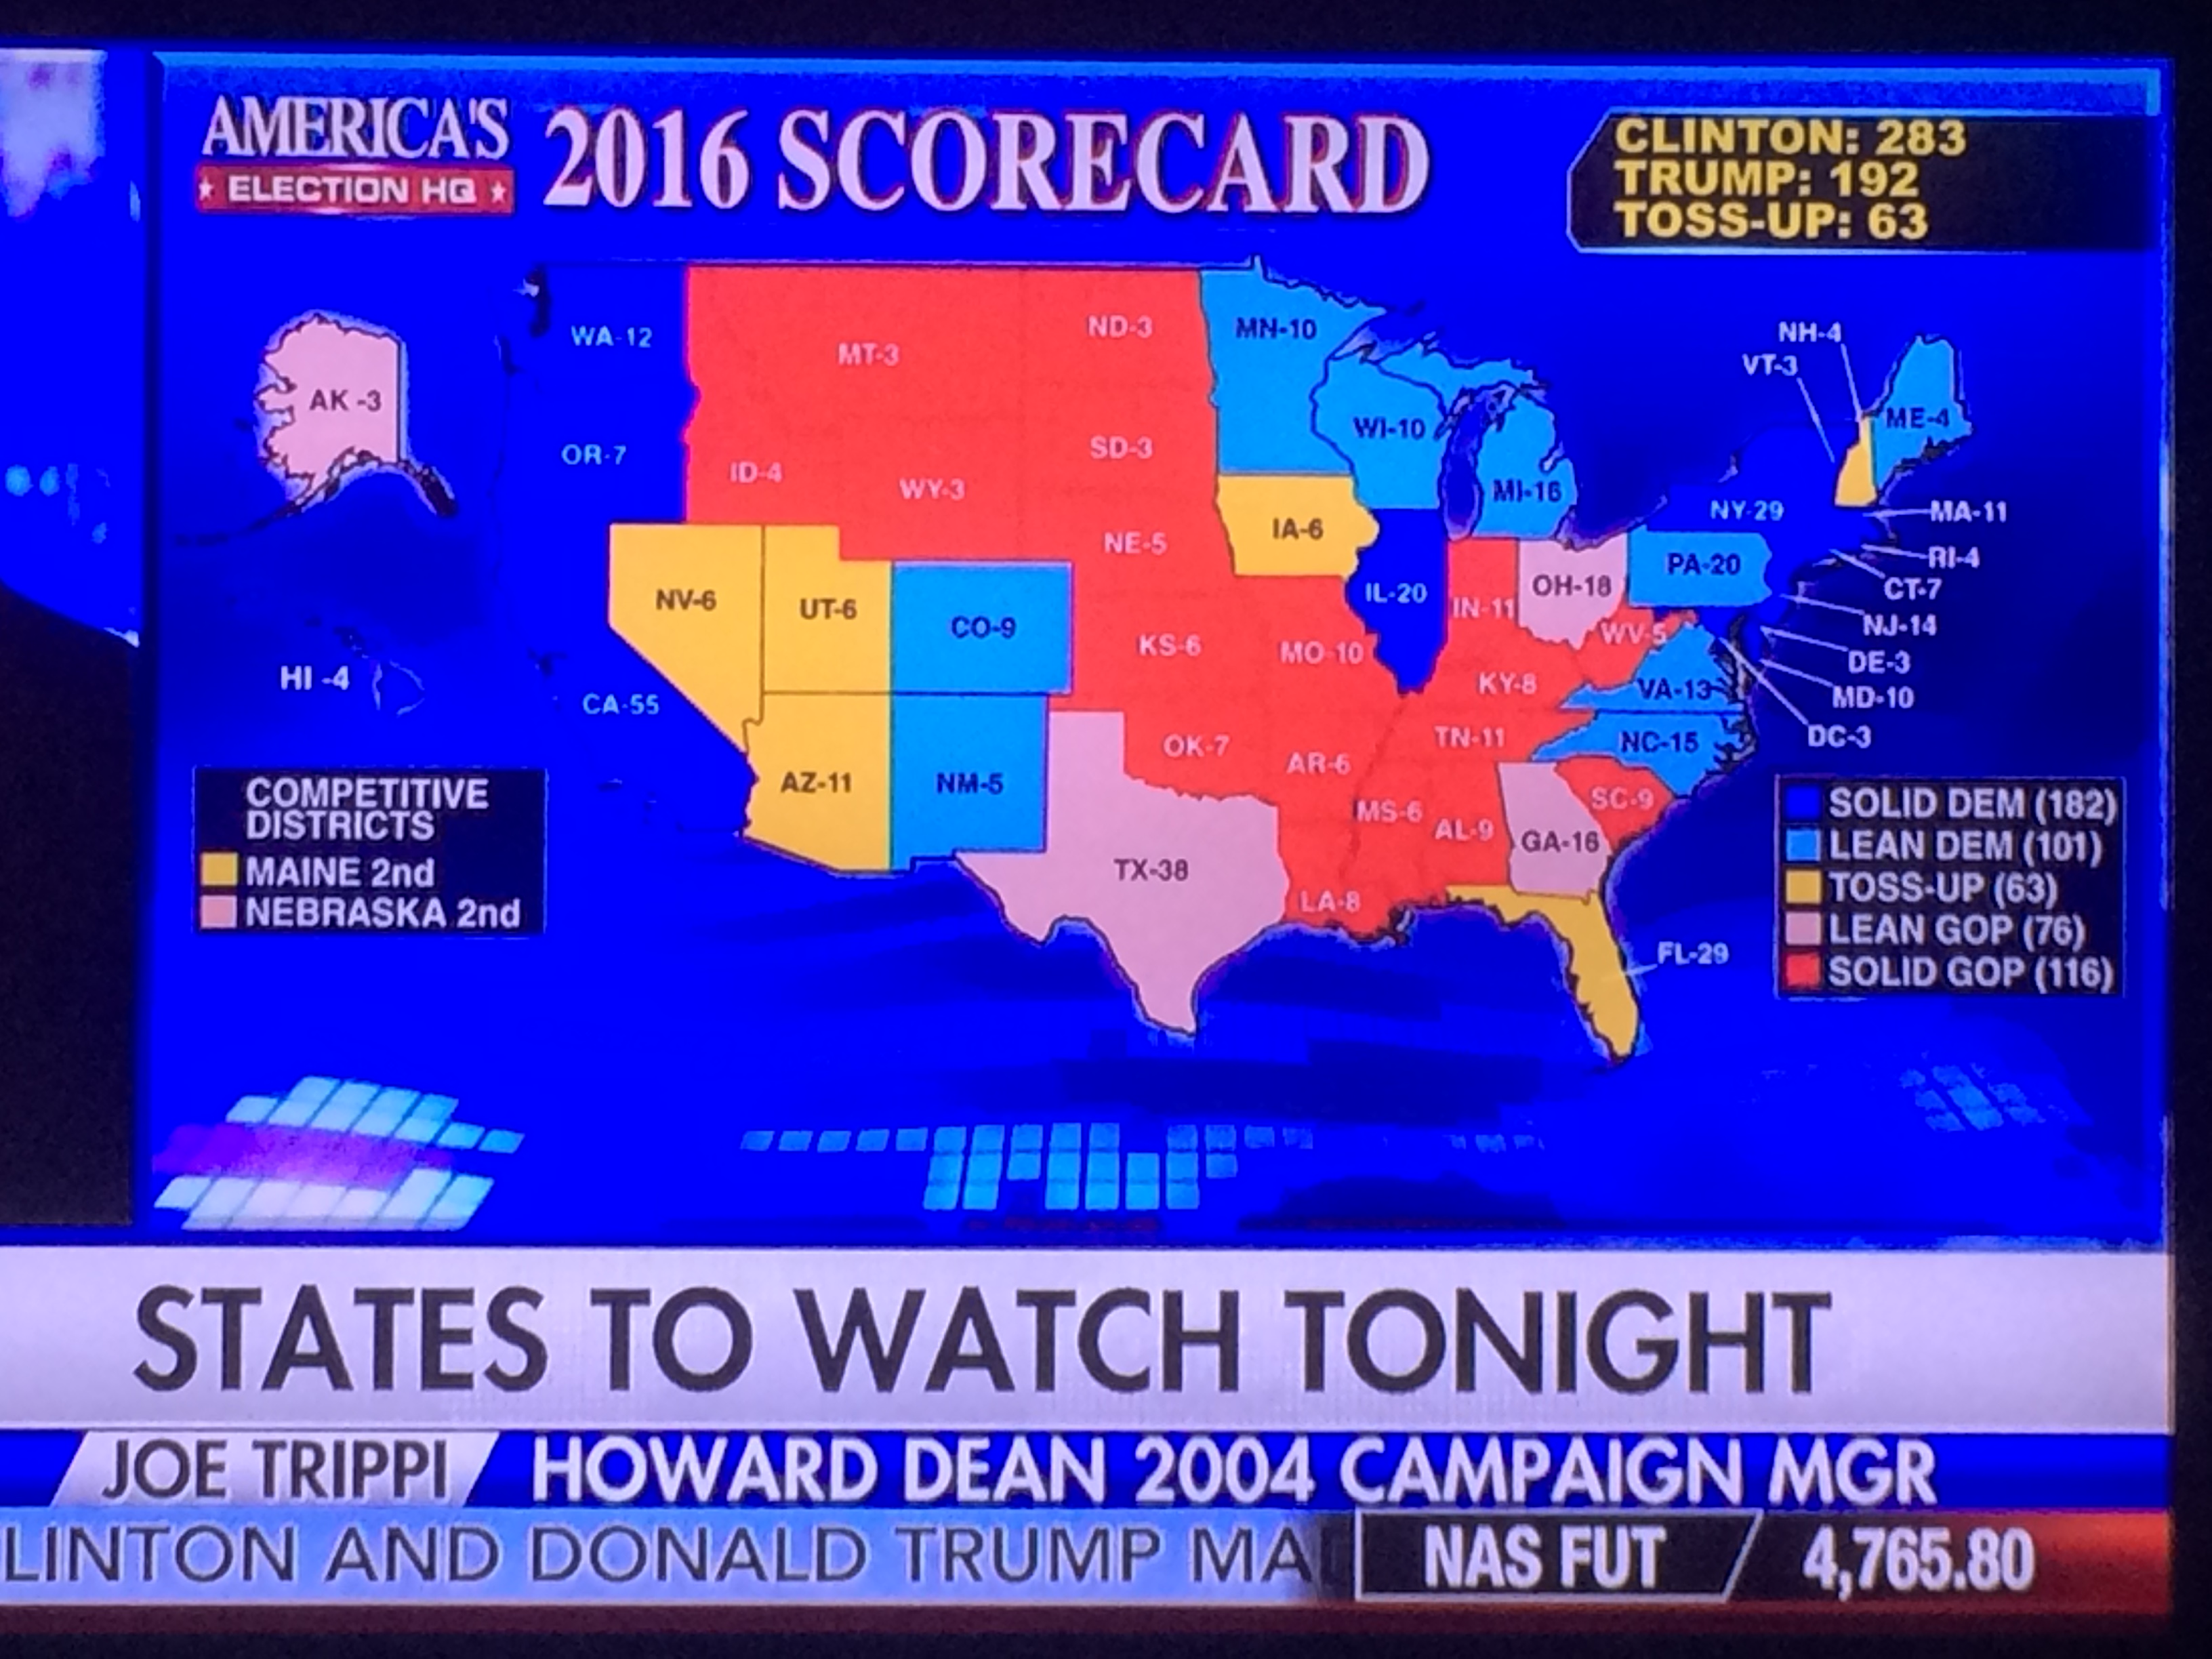 Fox News' Projections on the even of the 2016 Presidential (General) Election (Nov. 8, 2016).